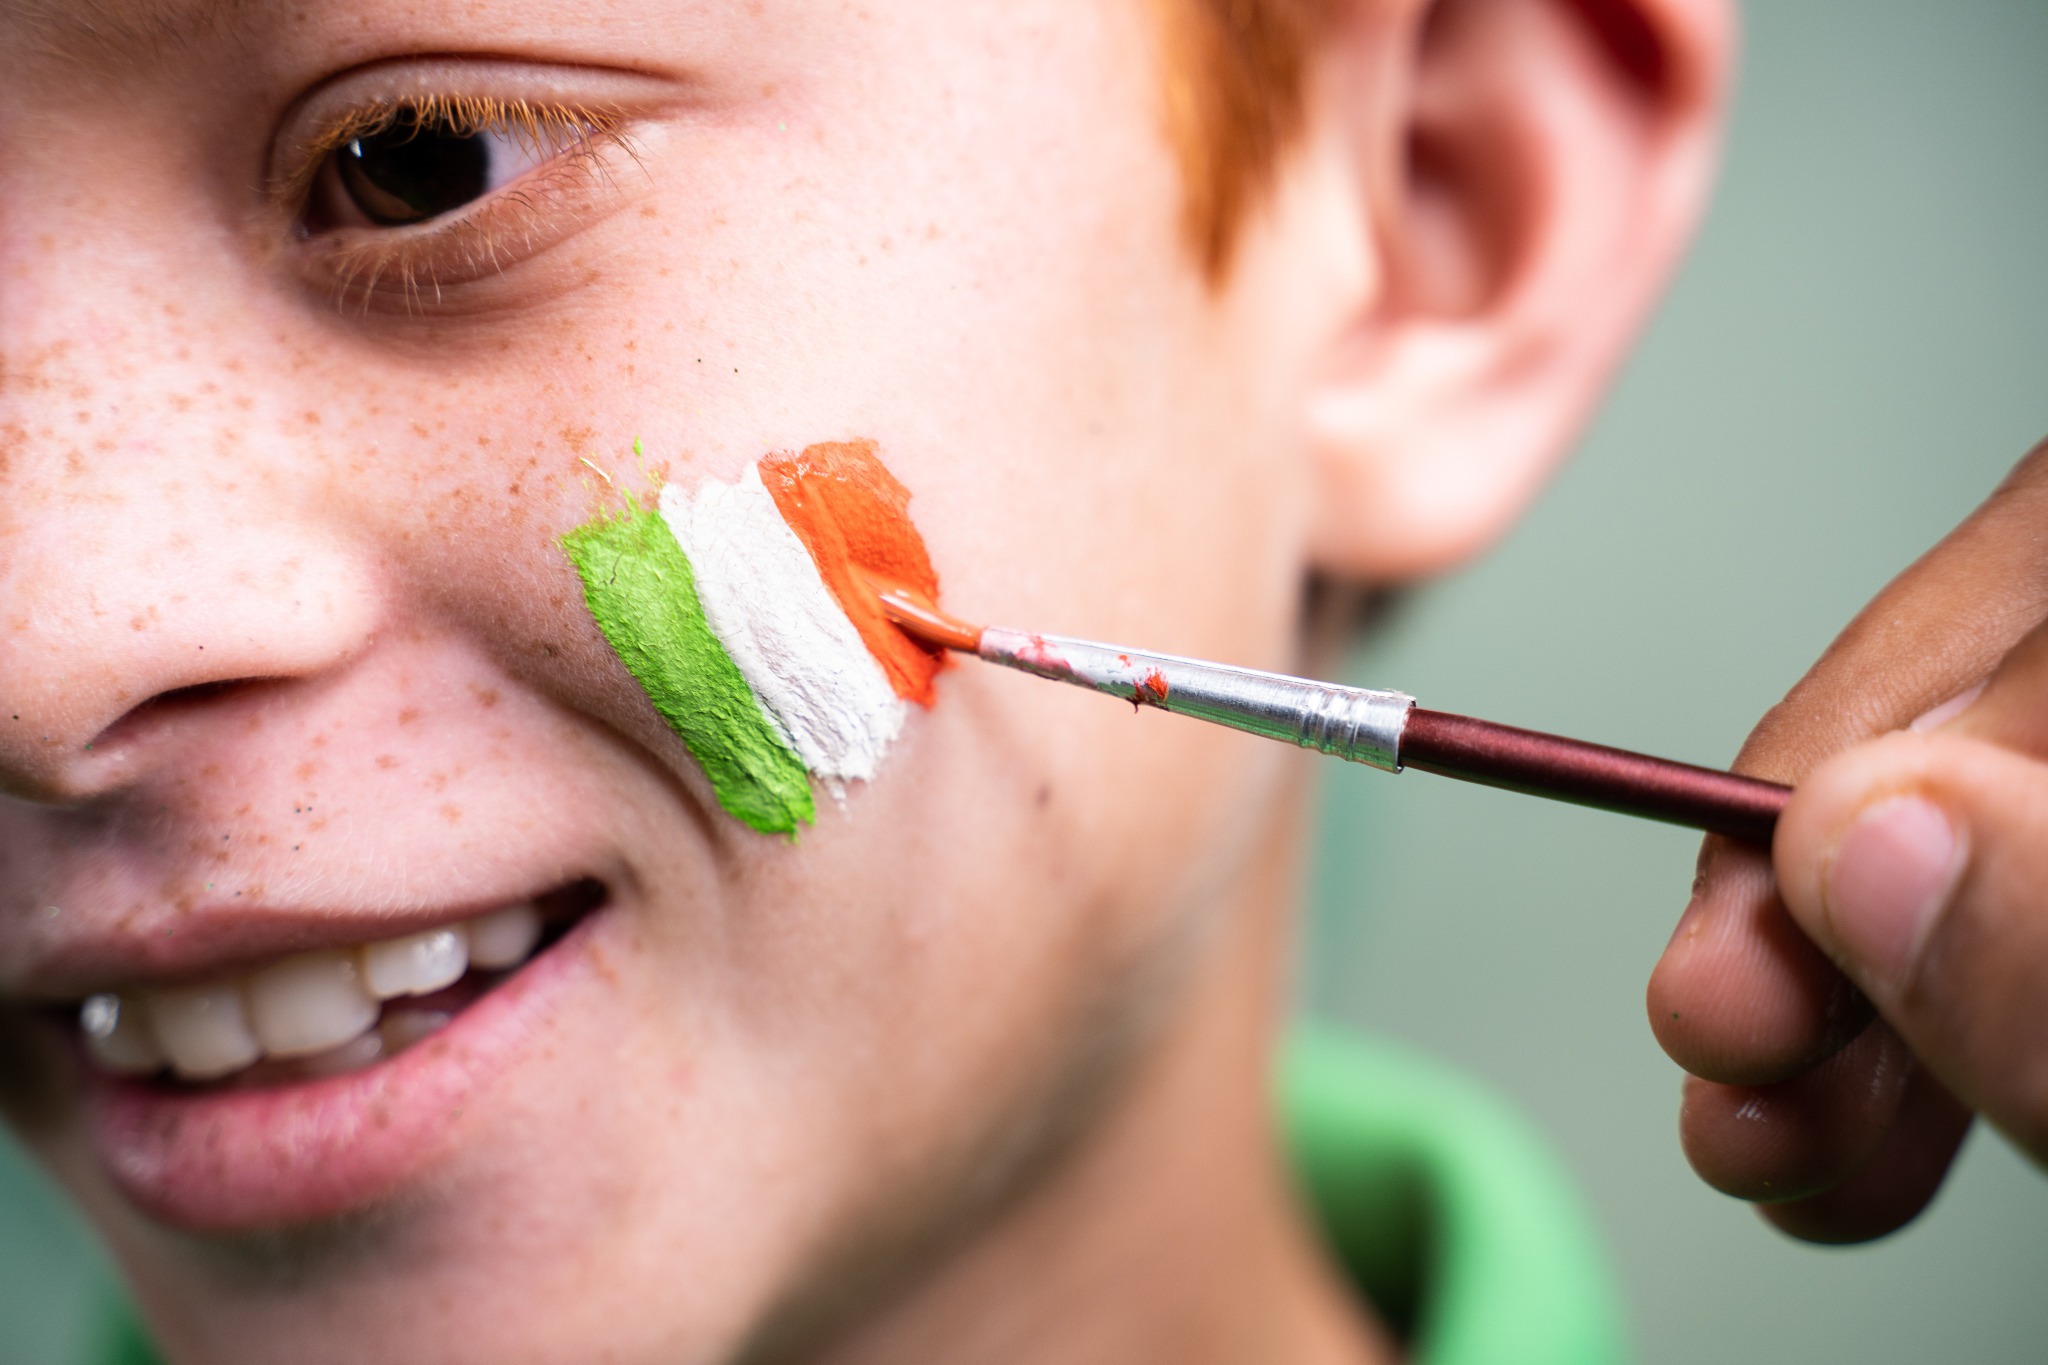 A red-headed child having the Irish flag painted on his cheek.